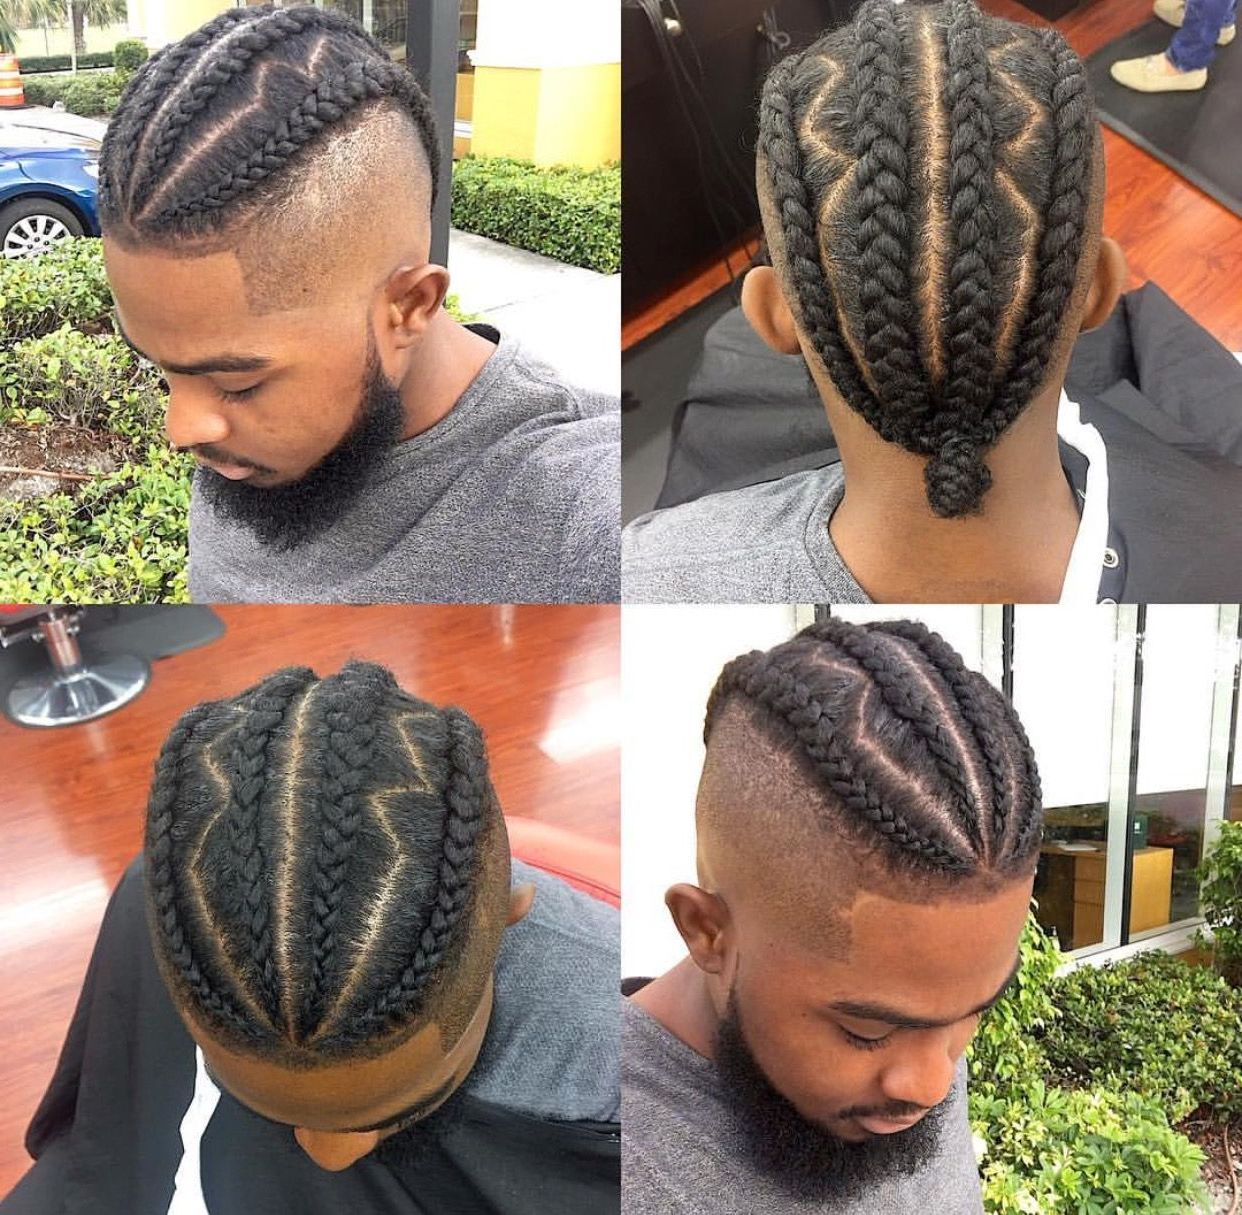 Braided Mowhawk #hair #nice #cool #hot #style #fire In Preferred Braided Frohawk Hairstyles (View 10 of 20)